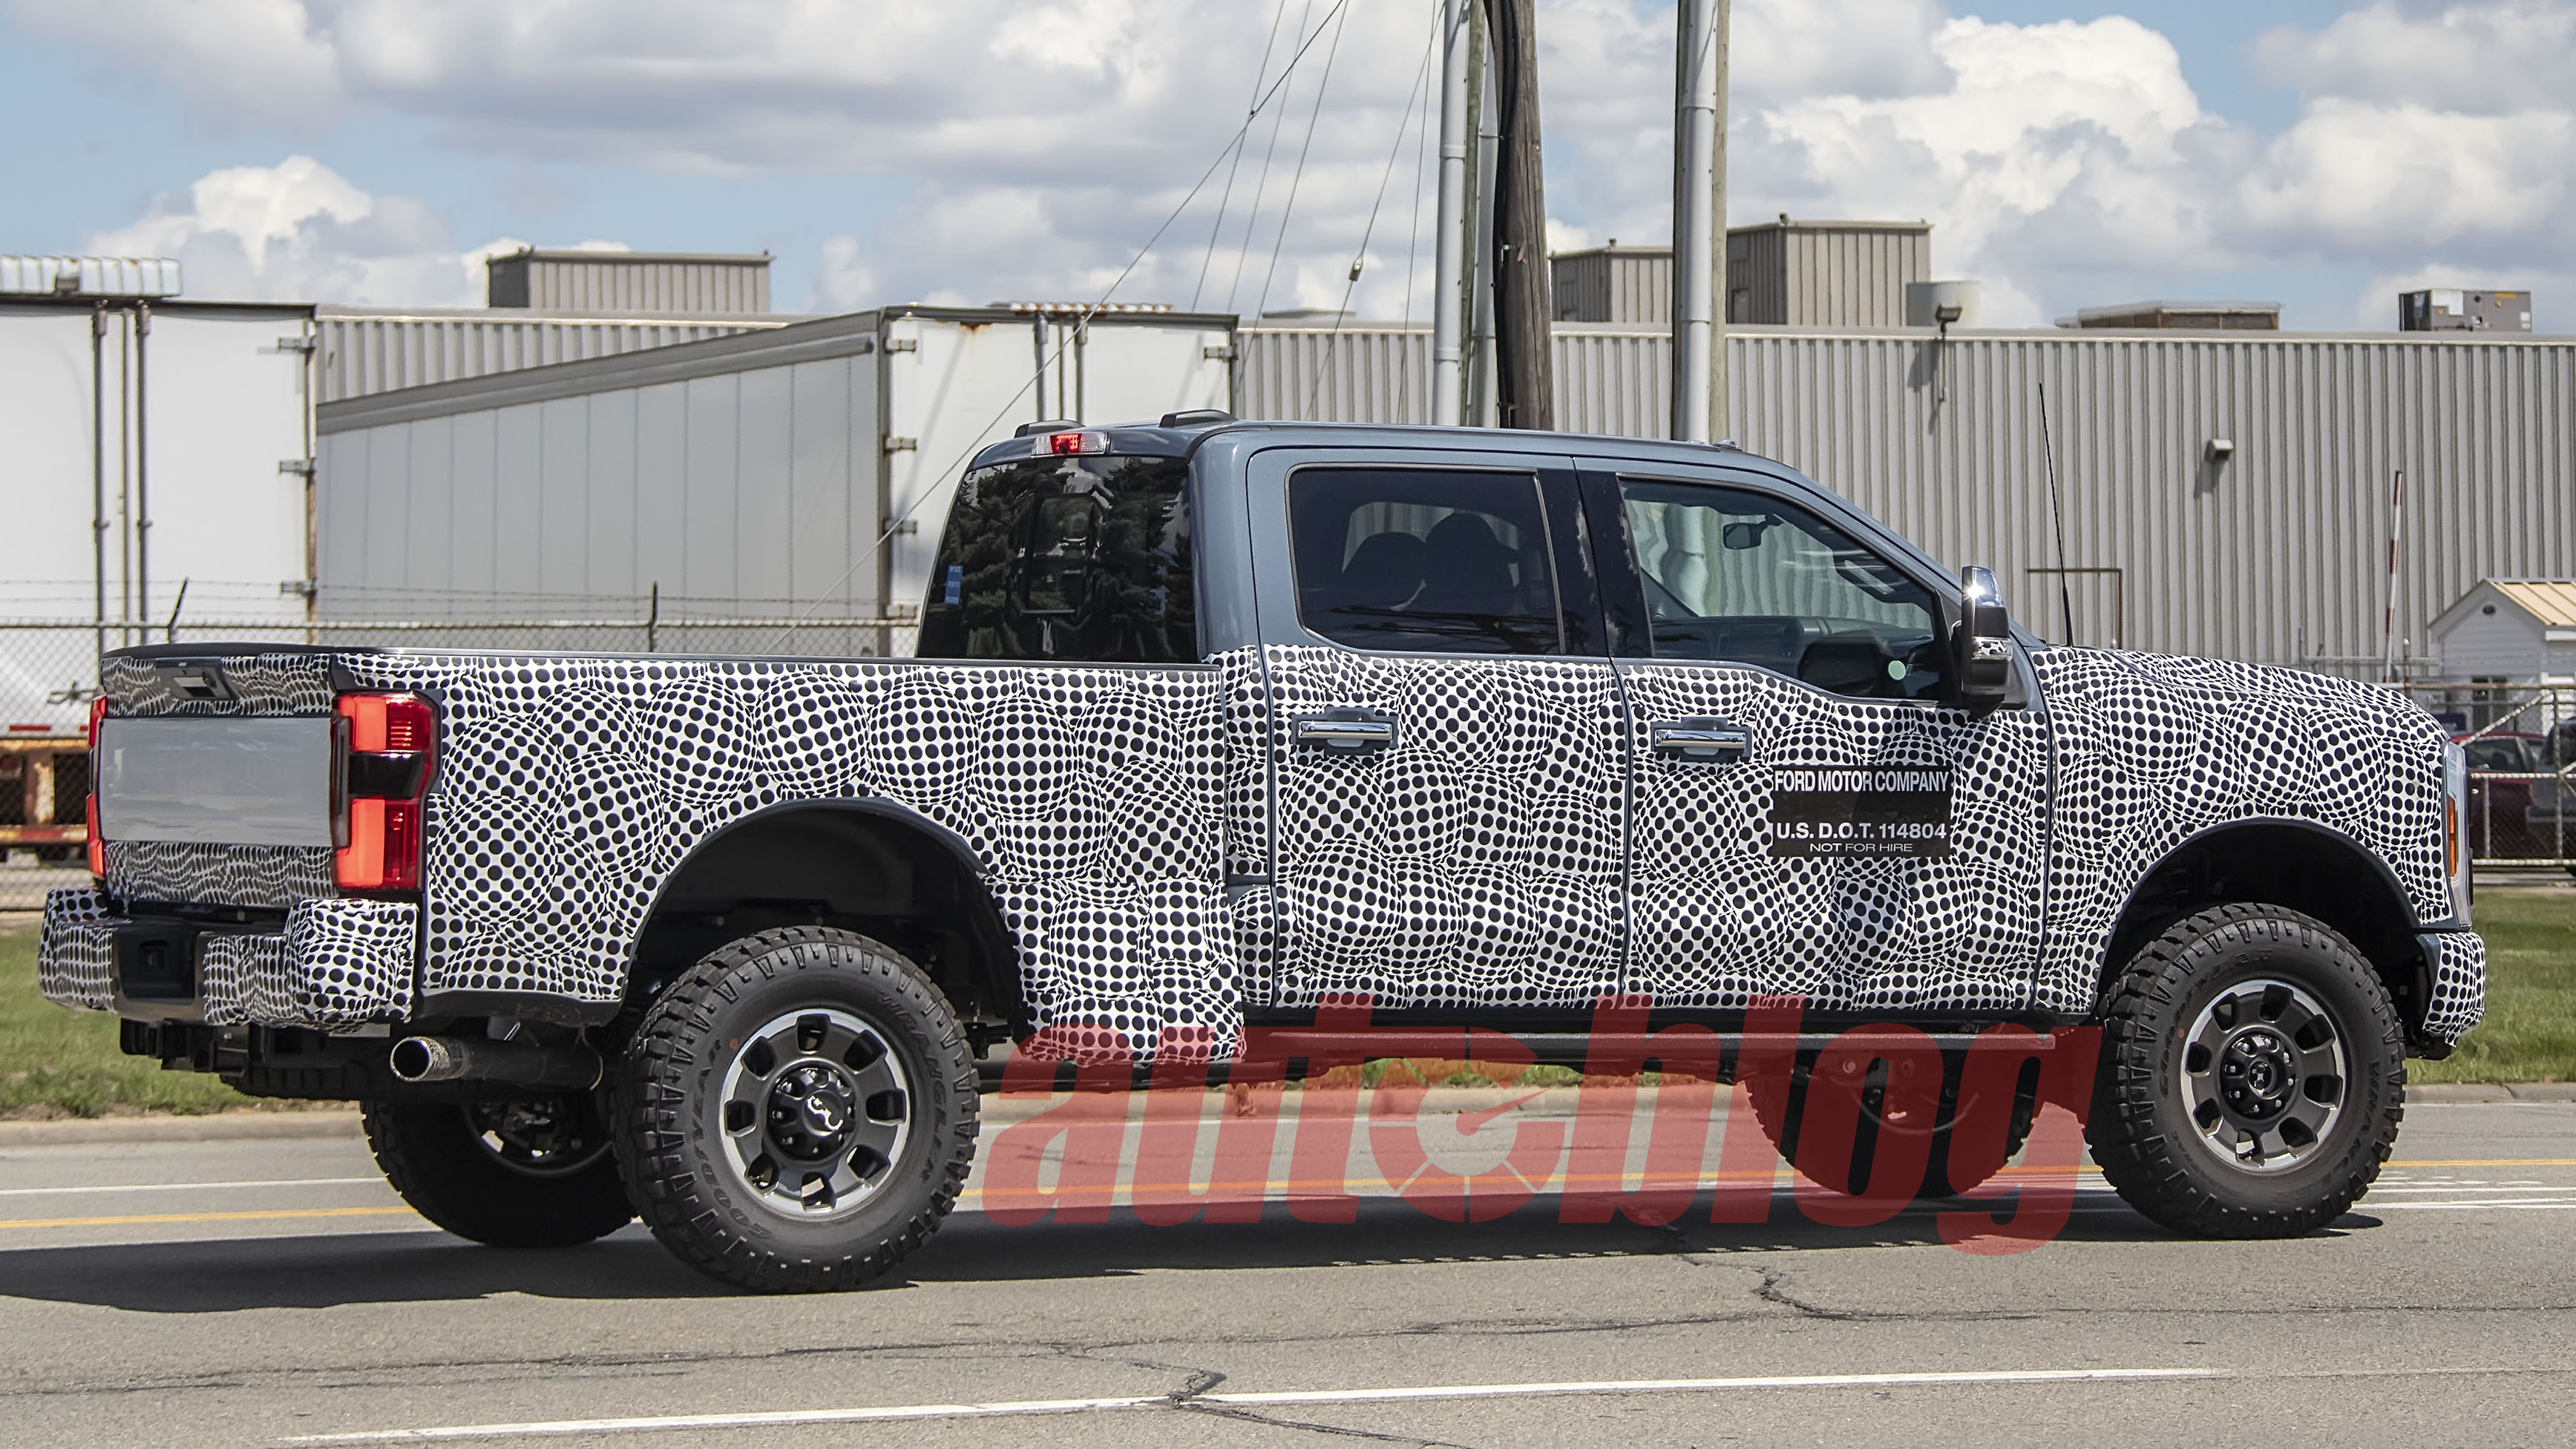 Updated Ford Super Duty Tremor prototype caught testing in new spy photos